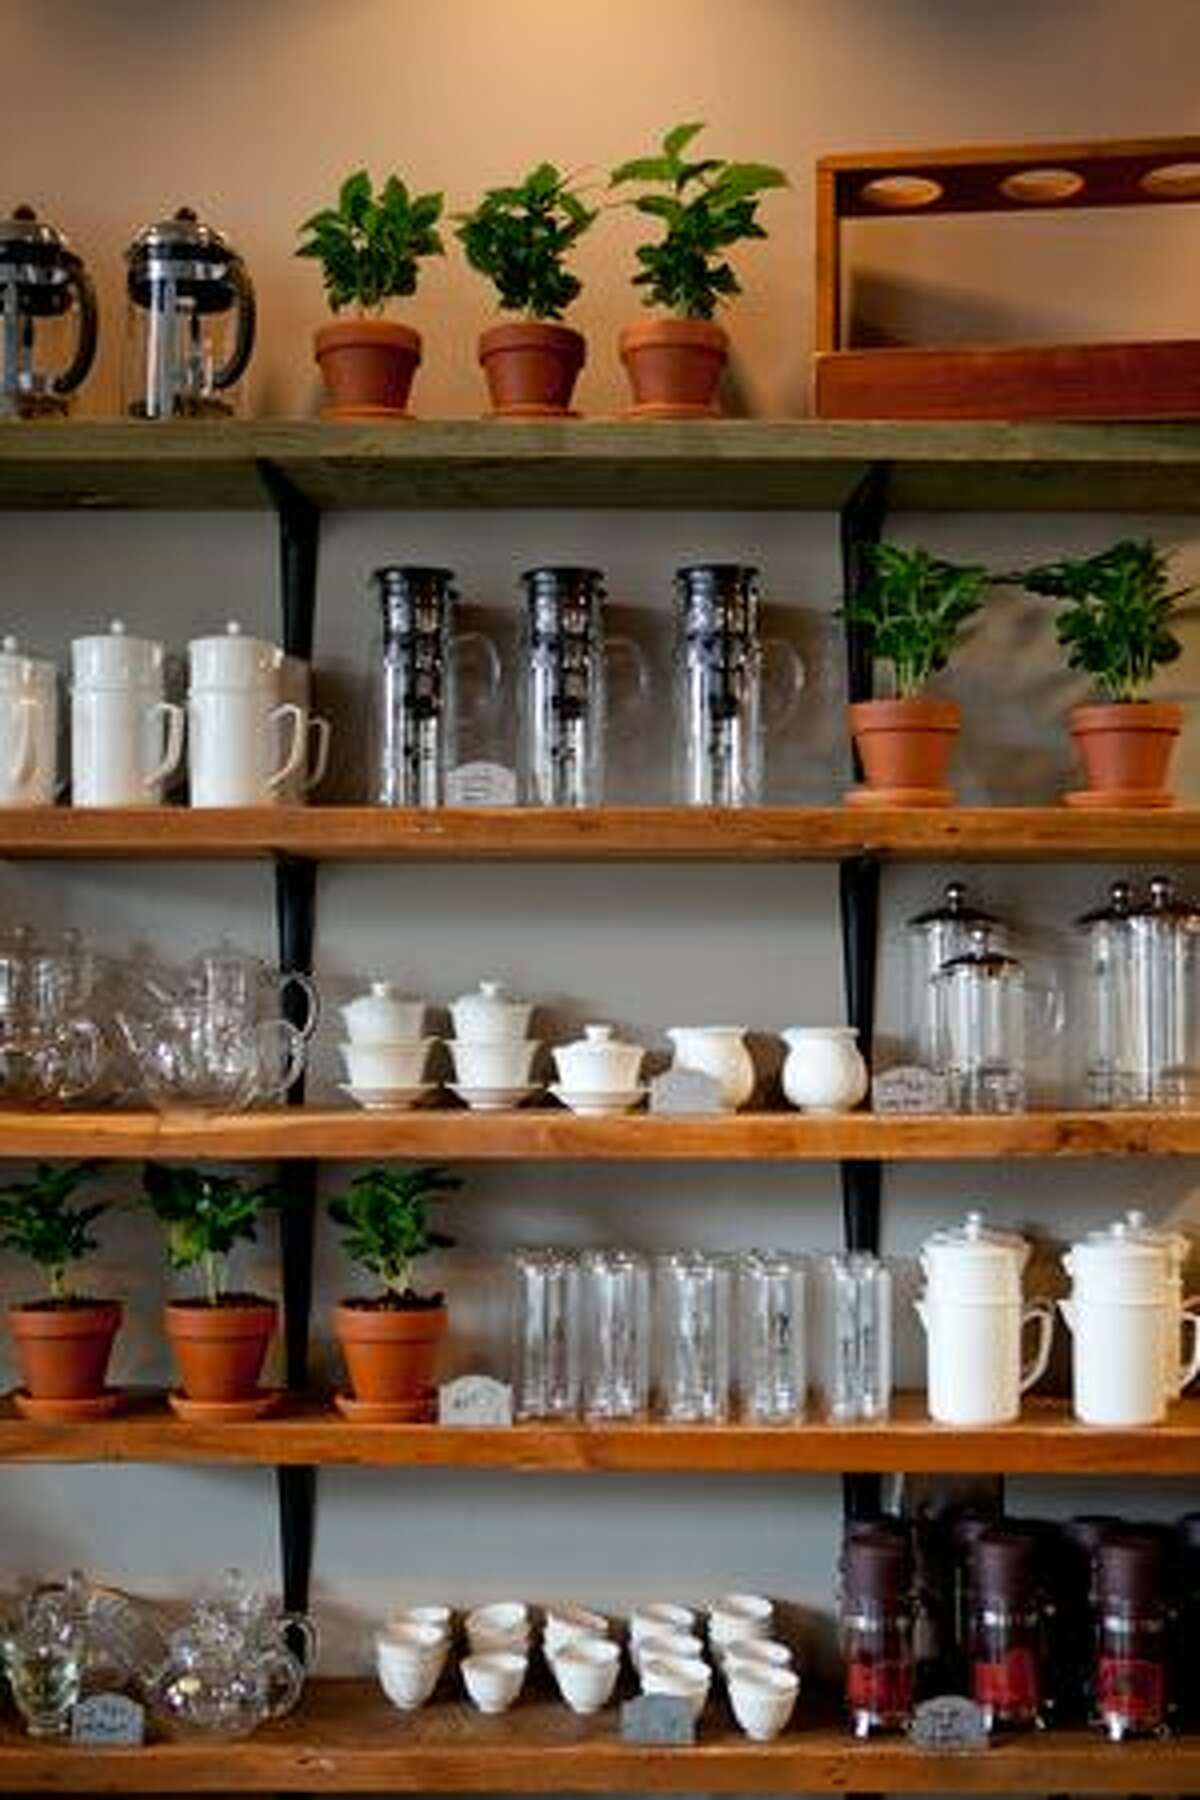 Shelves are shown at Starbucks' new 15th Avenue Coffee & Tea in Seattle's Capitol Hill neighborhood. The store is part of a project where Starbucks is trying to rebrand stores to blend into neighborhoods and be more of a community gathering place.